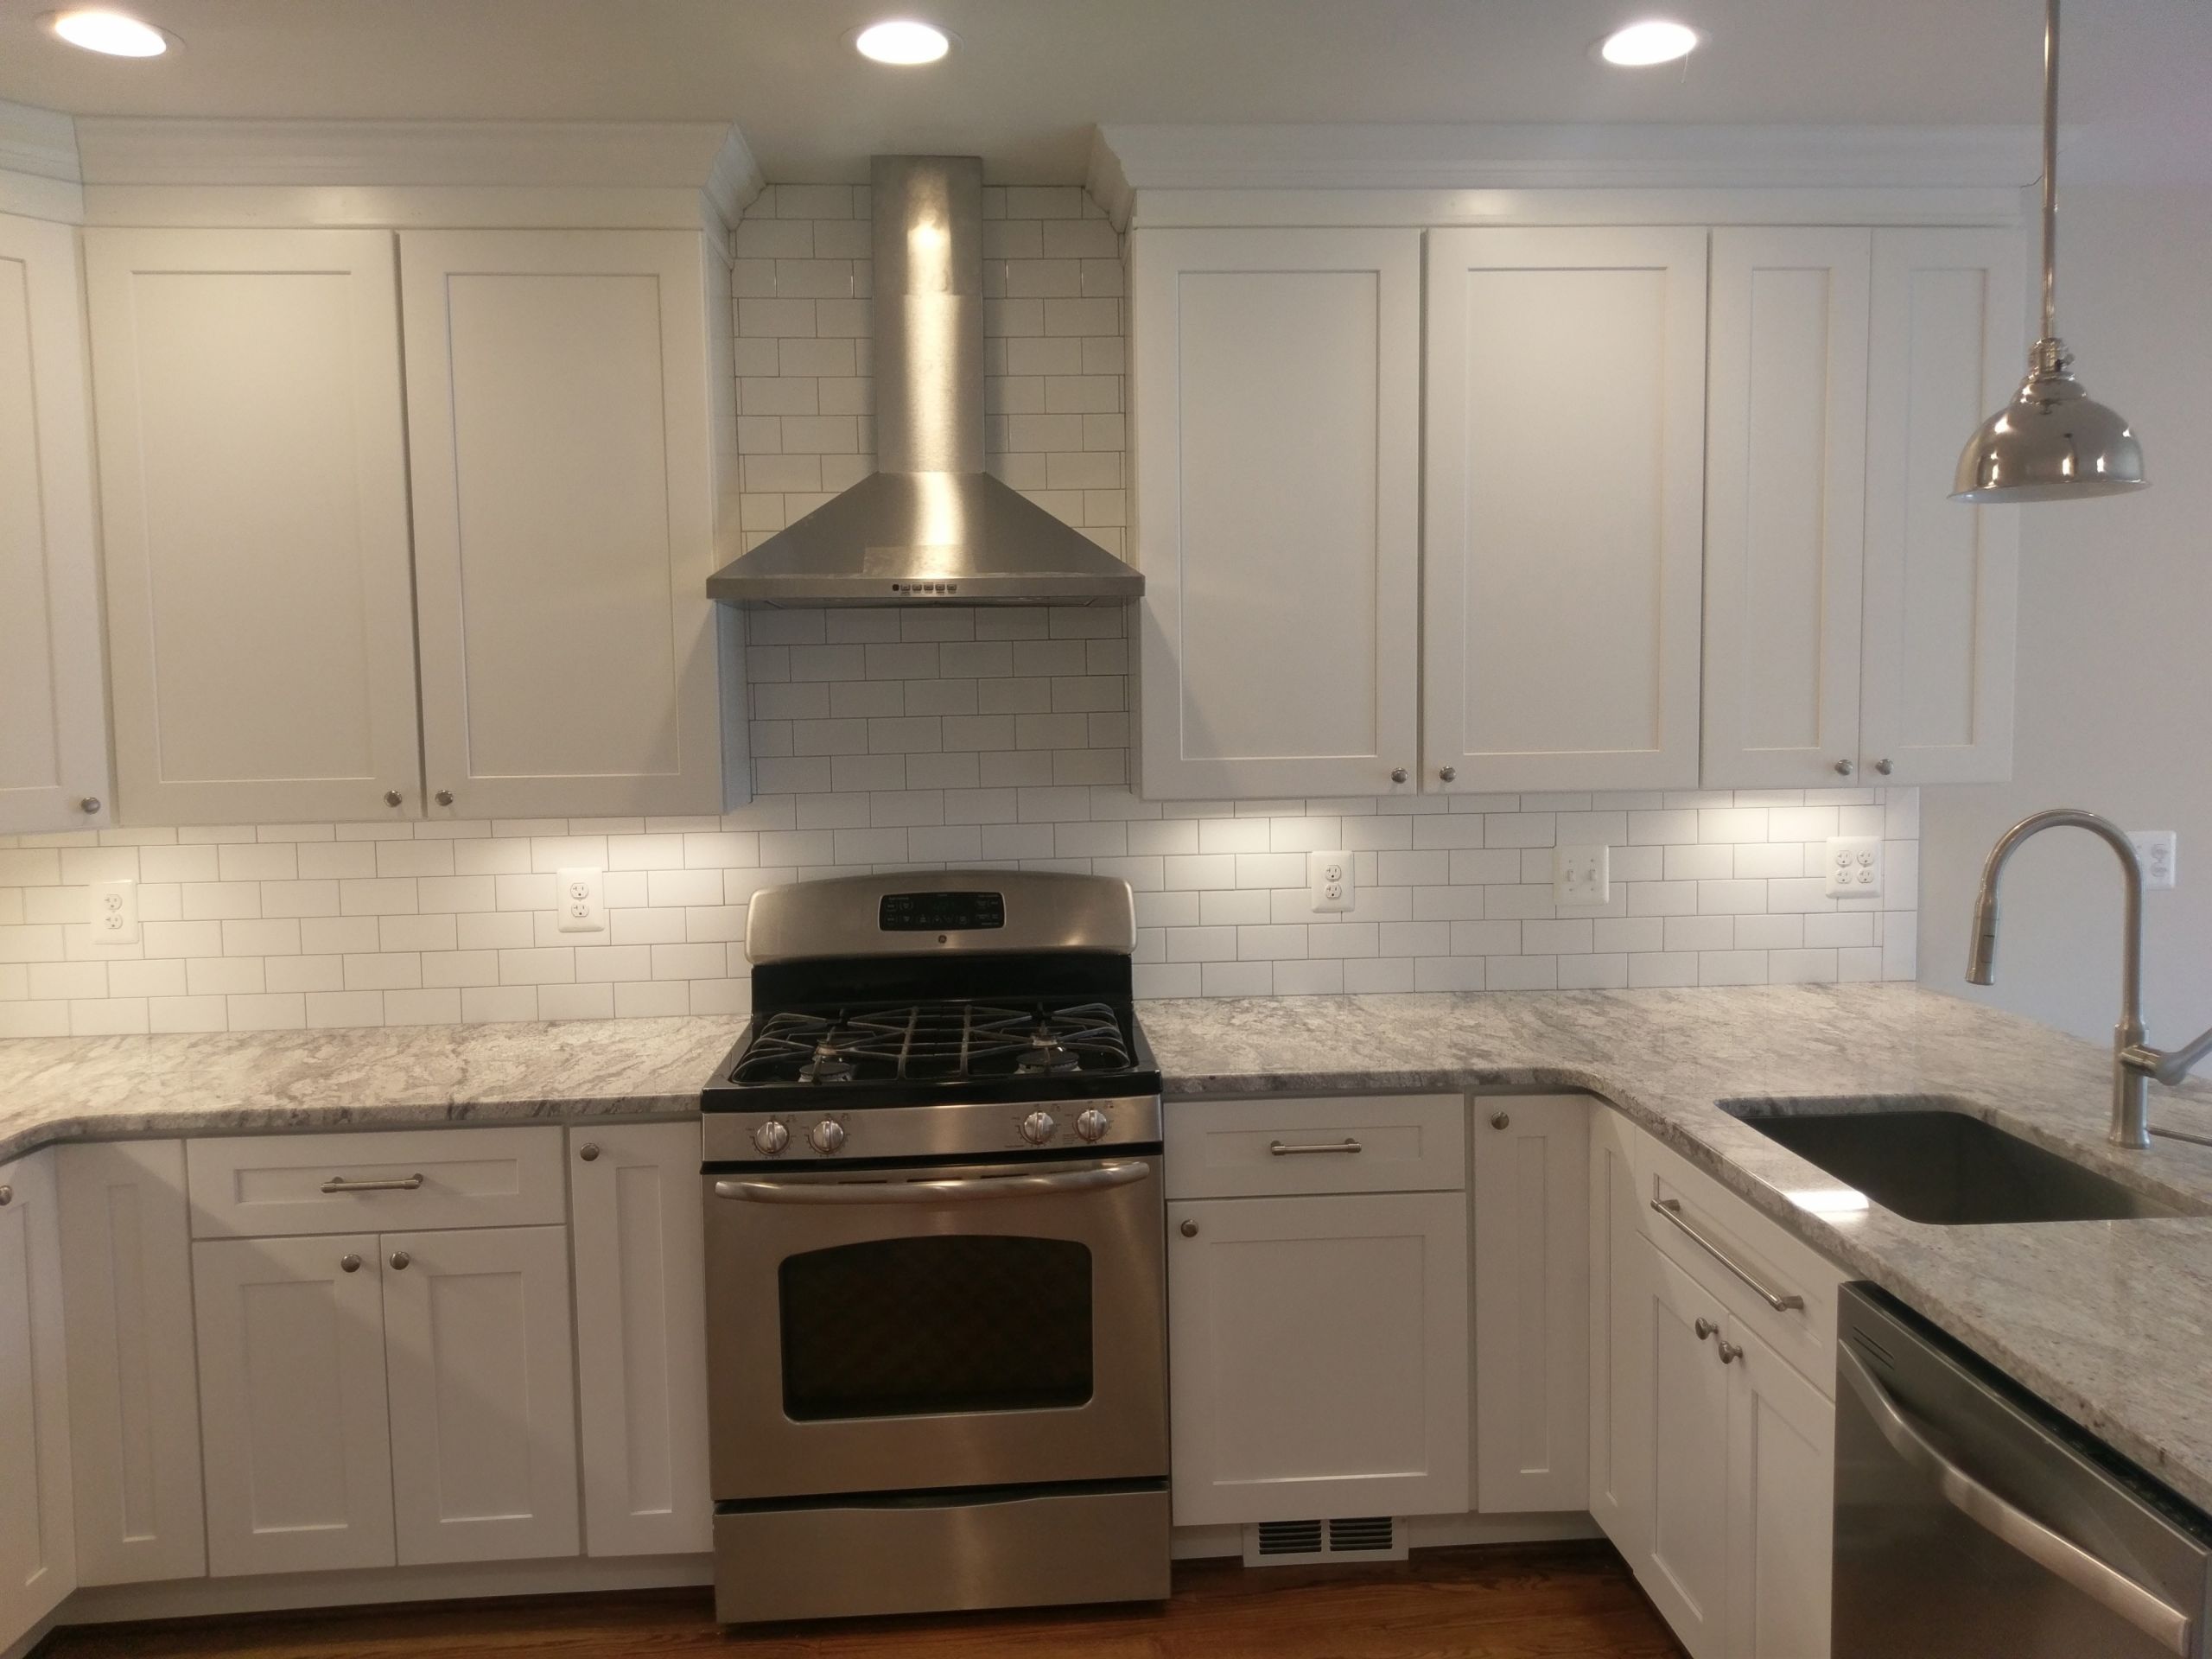 Kitchen And Bath Remodeling Contractors
 Washington DC Home Remodeling Contractor Elite